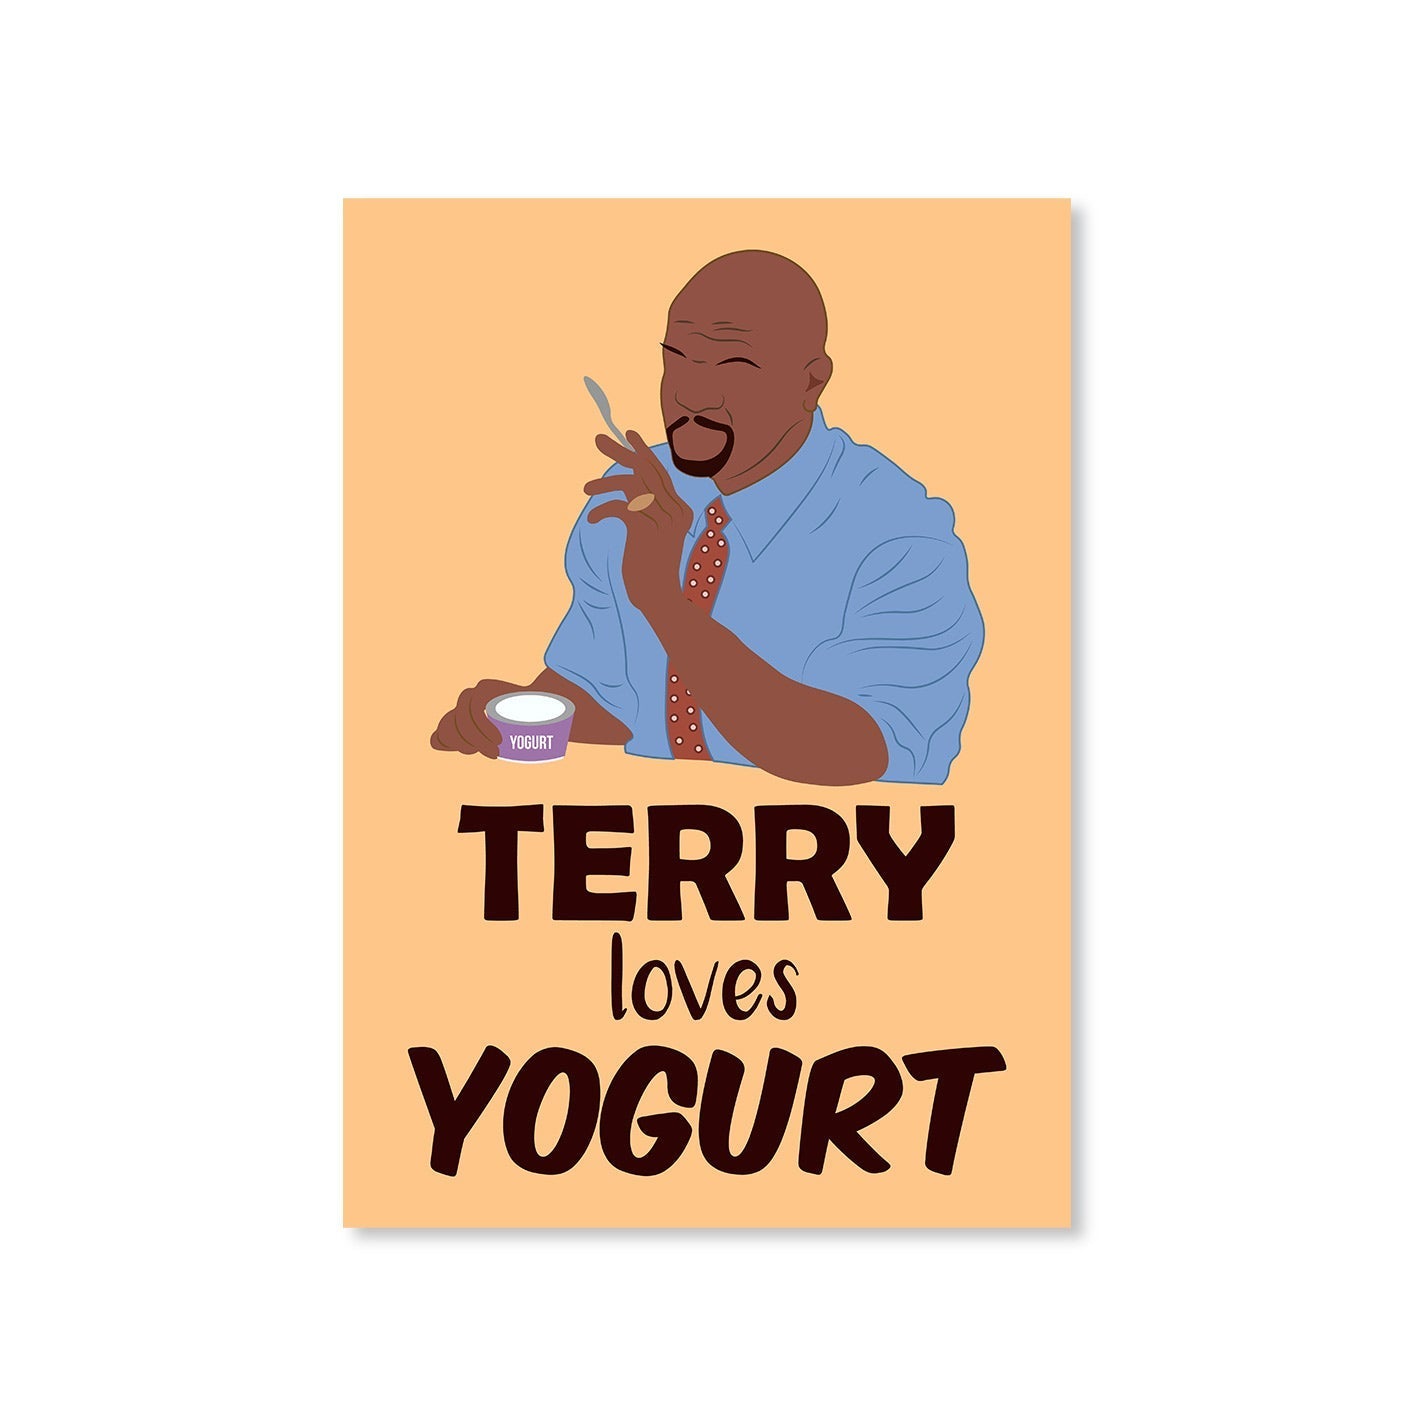 brooklyn nine-nine terry loves yogurt poster wall art buy online united states of america usa the banyan tee tbt a4 detective jake peralta terry charles boyle gina linetti andy samberg merchandise clothing acceessories